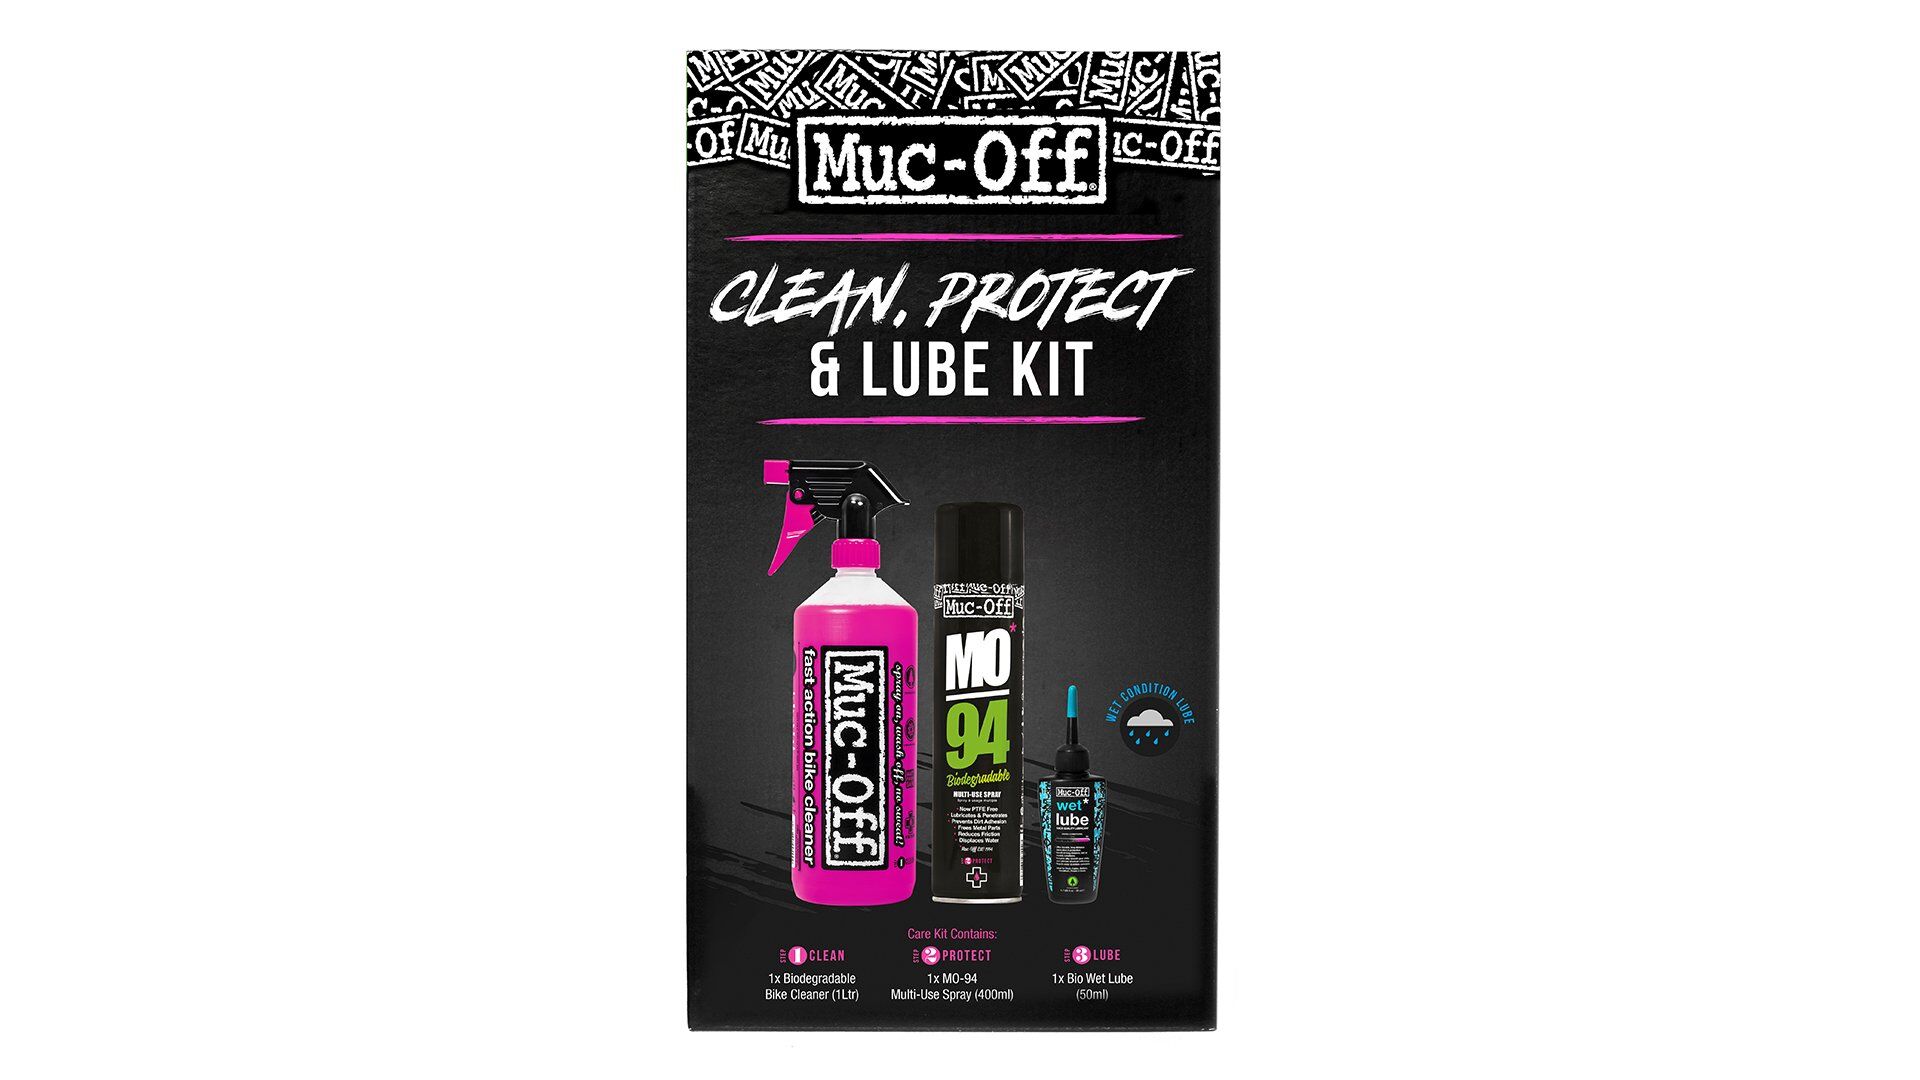 Muc-Off Wash Protect & Lube Kit - Bike cleaning kit